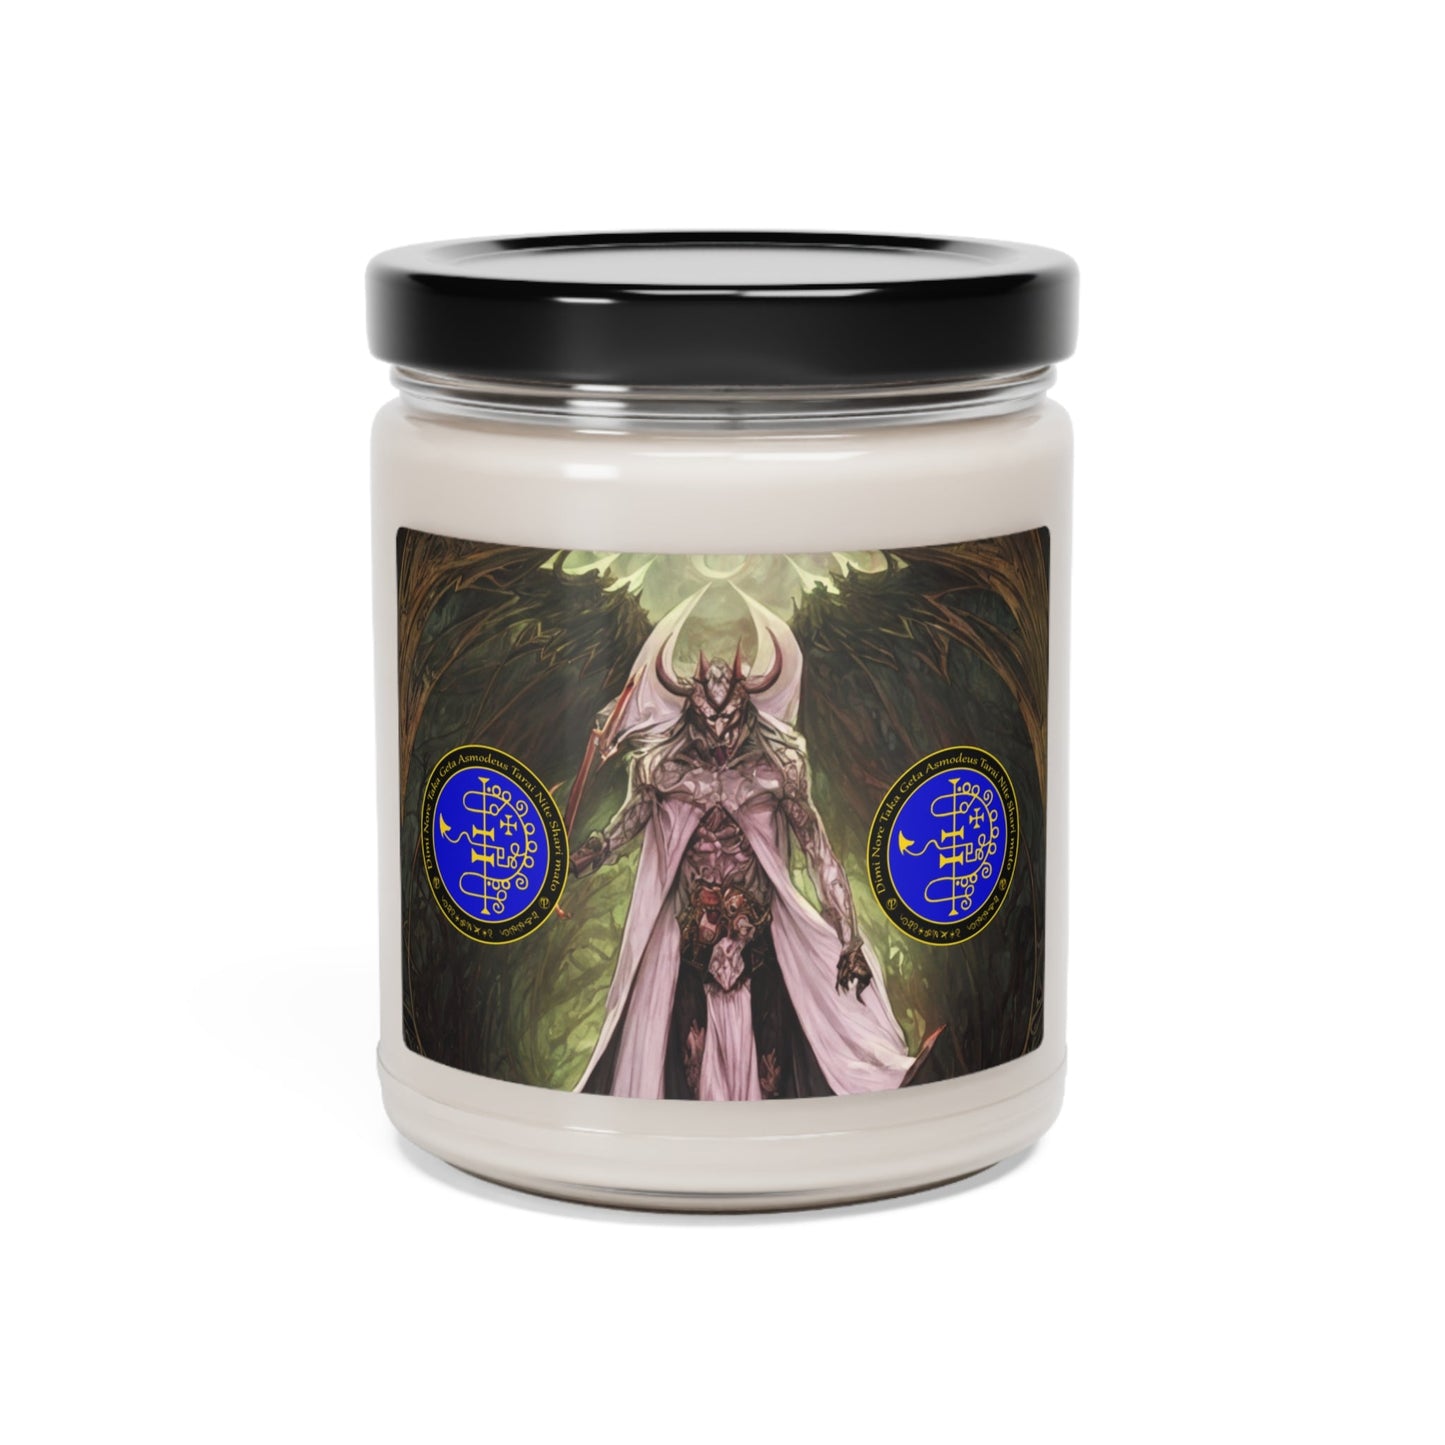 Demon-Asmodeus-oltar-Soy-Scented-Soy Candle-for-Gamble-related-offerings-rituals-inicijations-or-praying-and-meditation-6